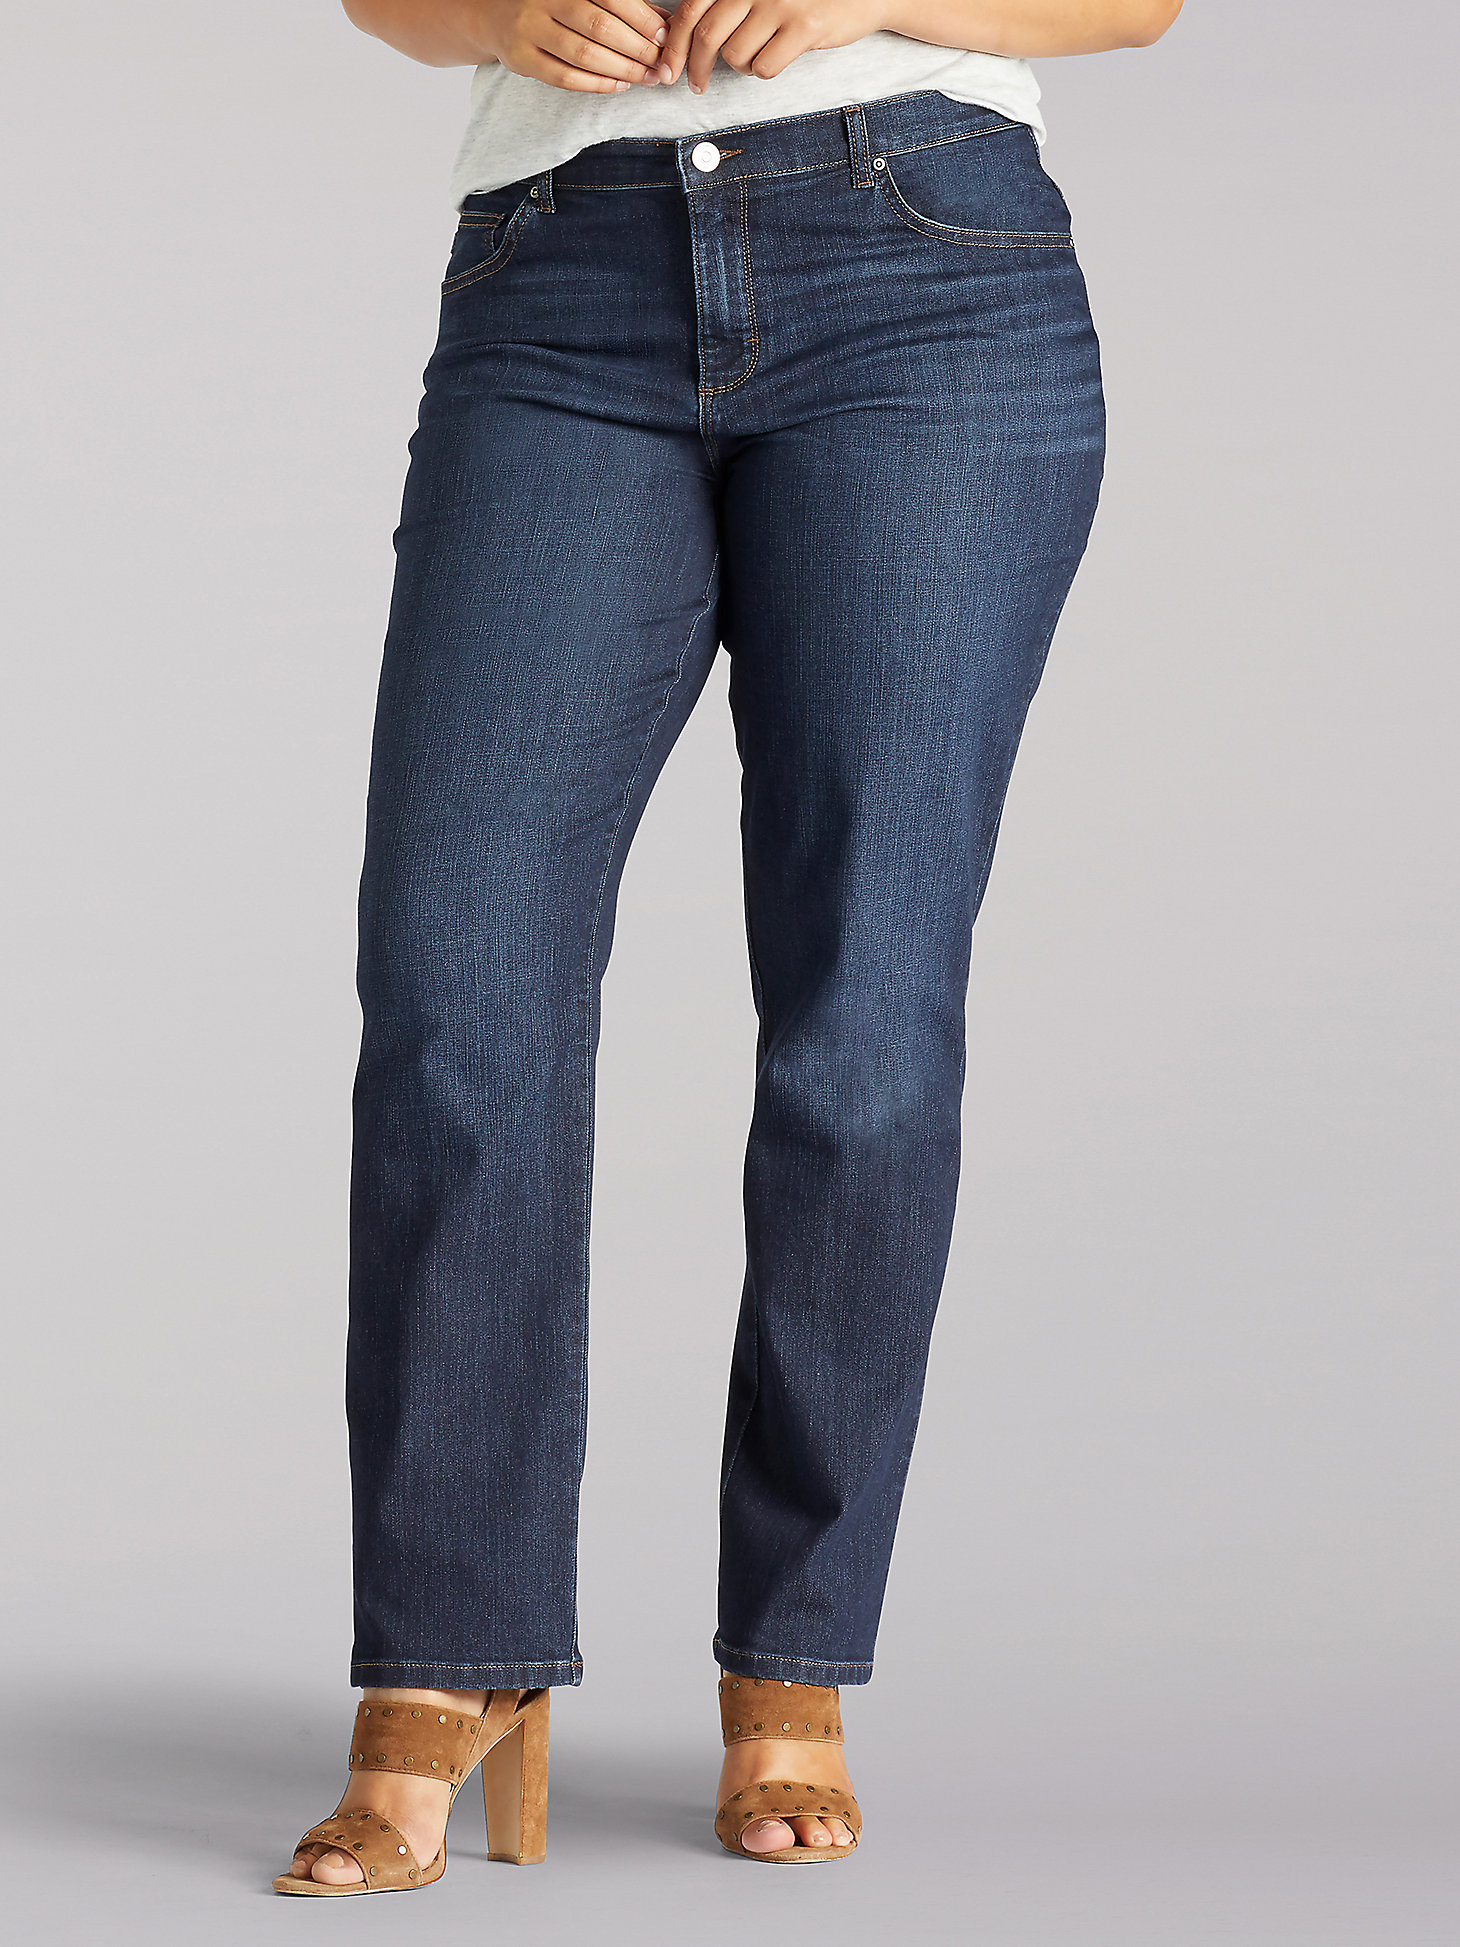 Women’s Stretch Relaxed Fit Straight Leg Jean (Plus) in Verona main view